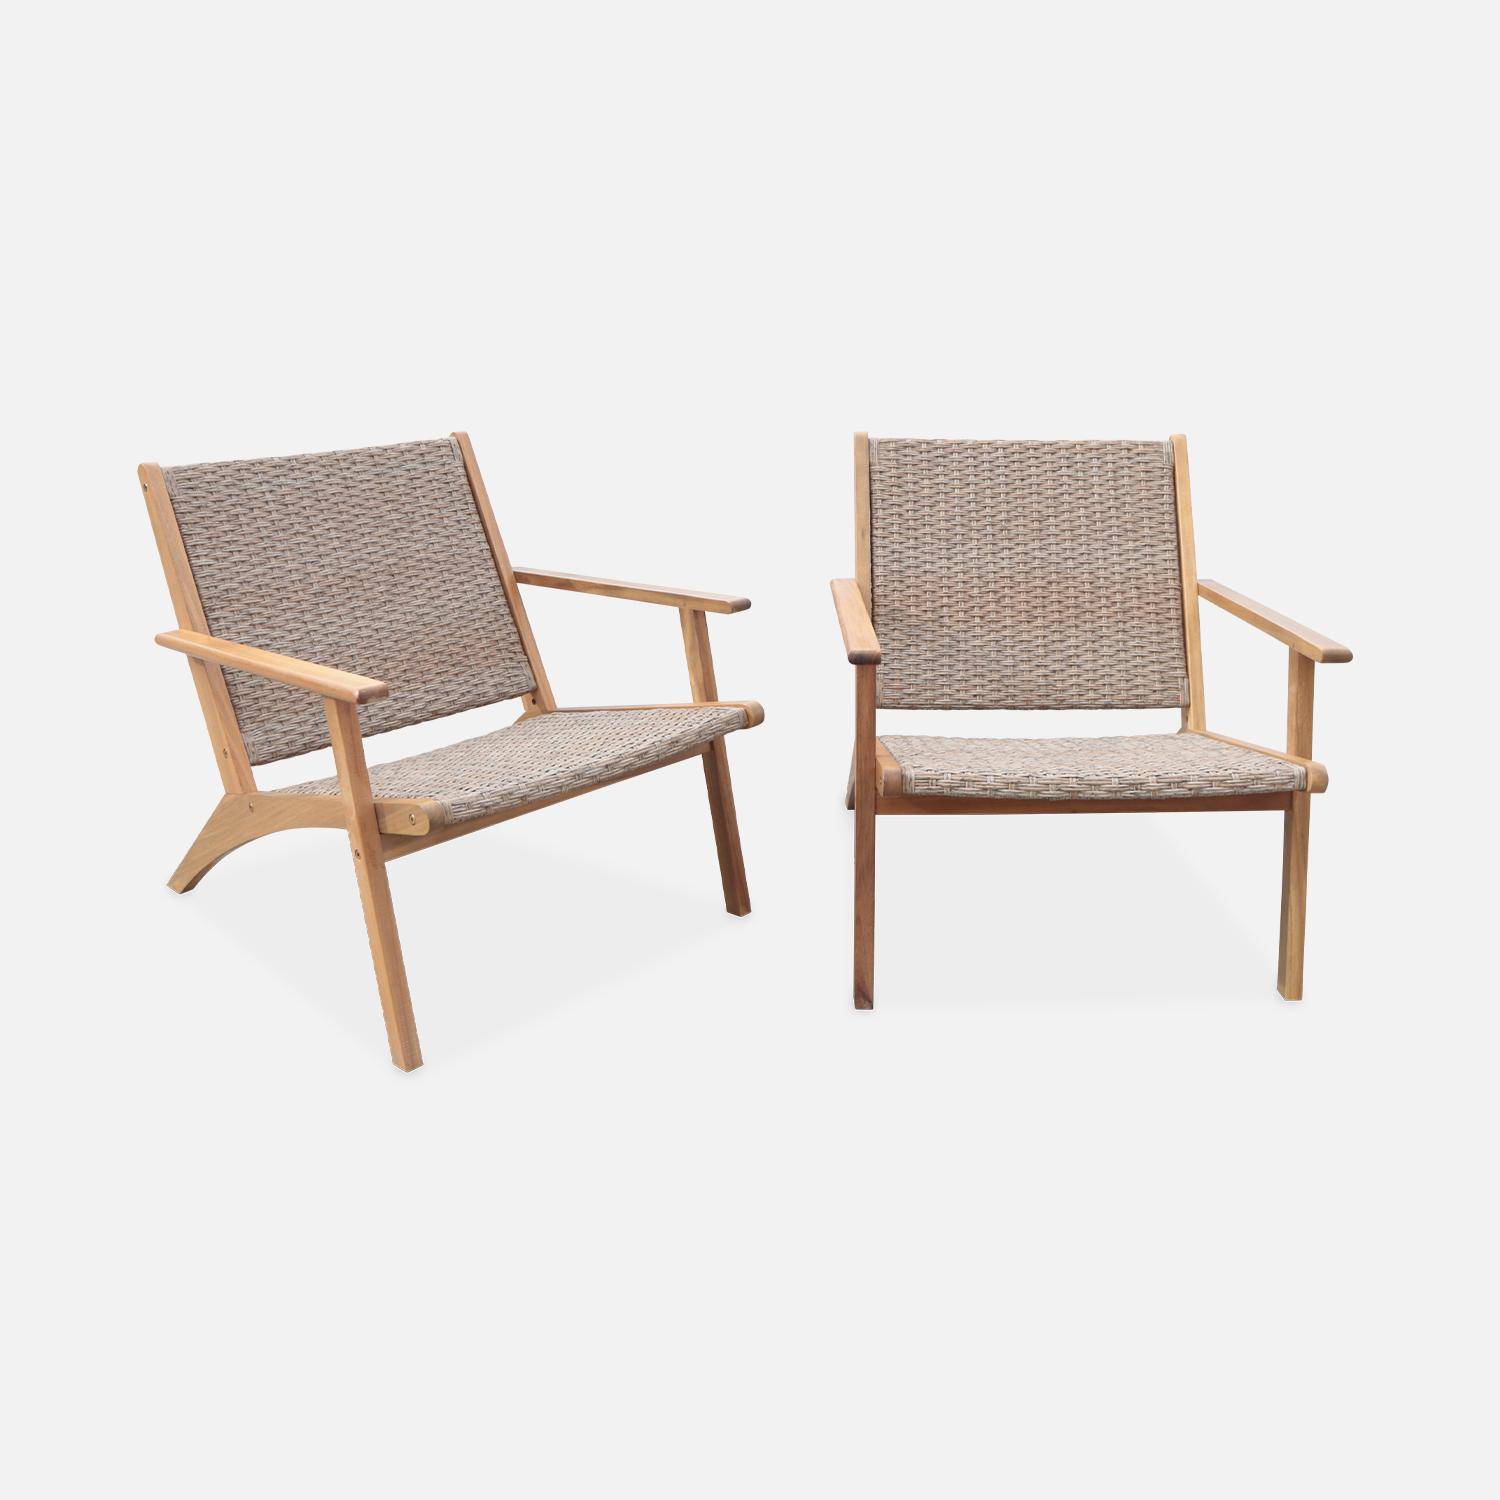 Set of 2 accent chairs in acacia wood and resin, natural, 62x78x67 cm Photo4